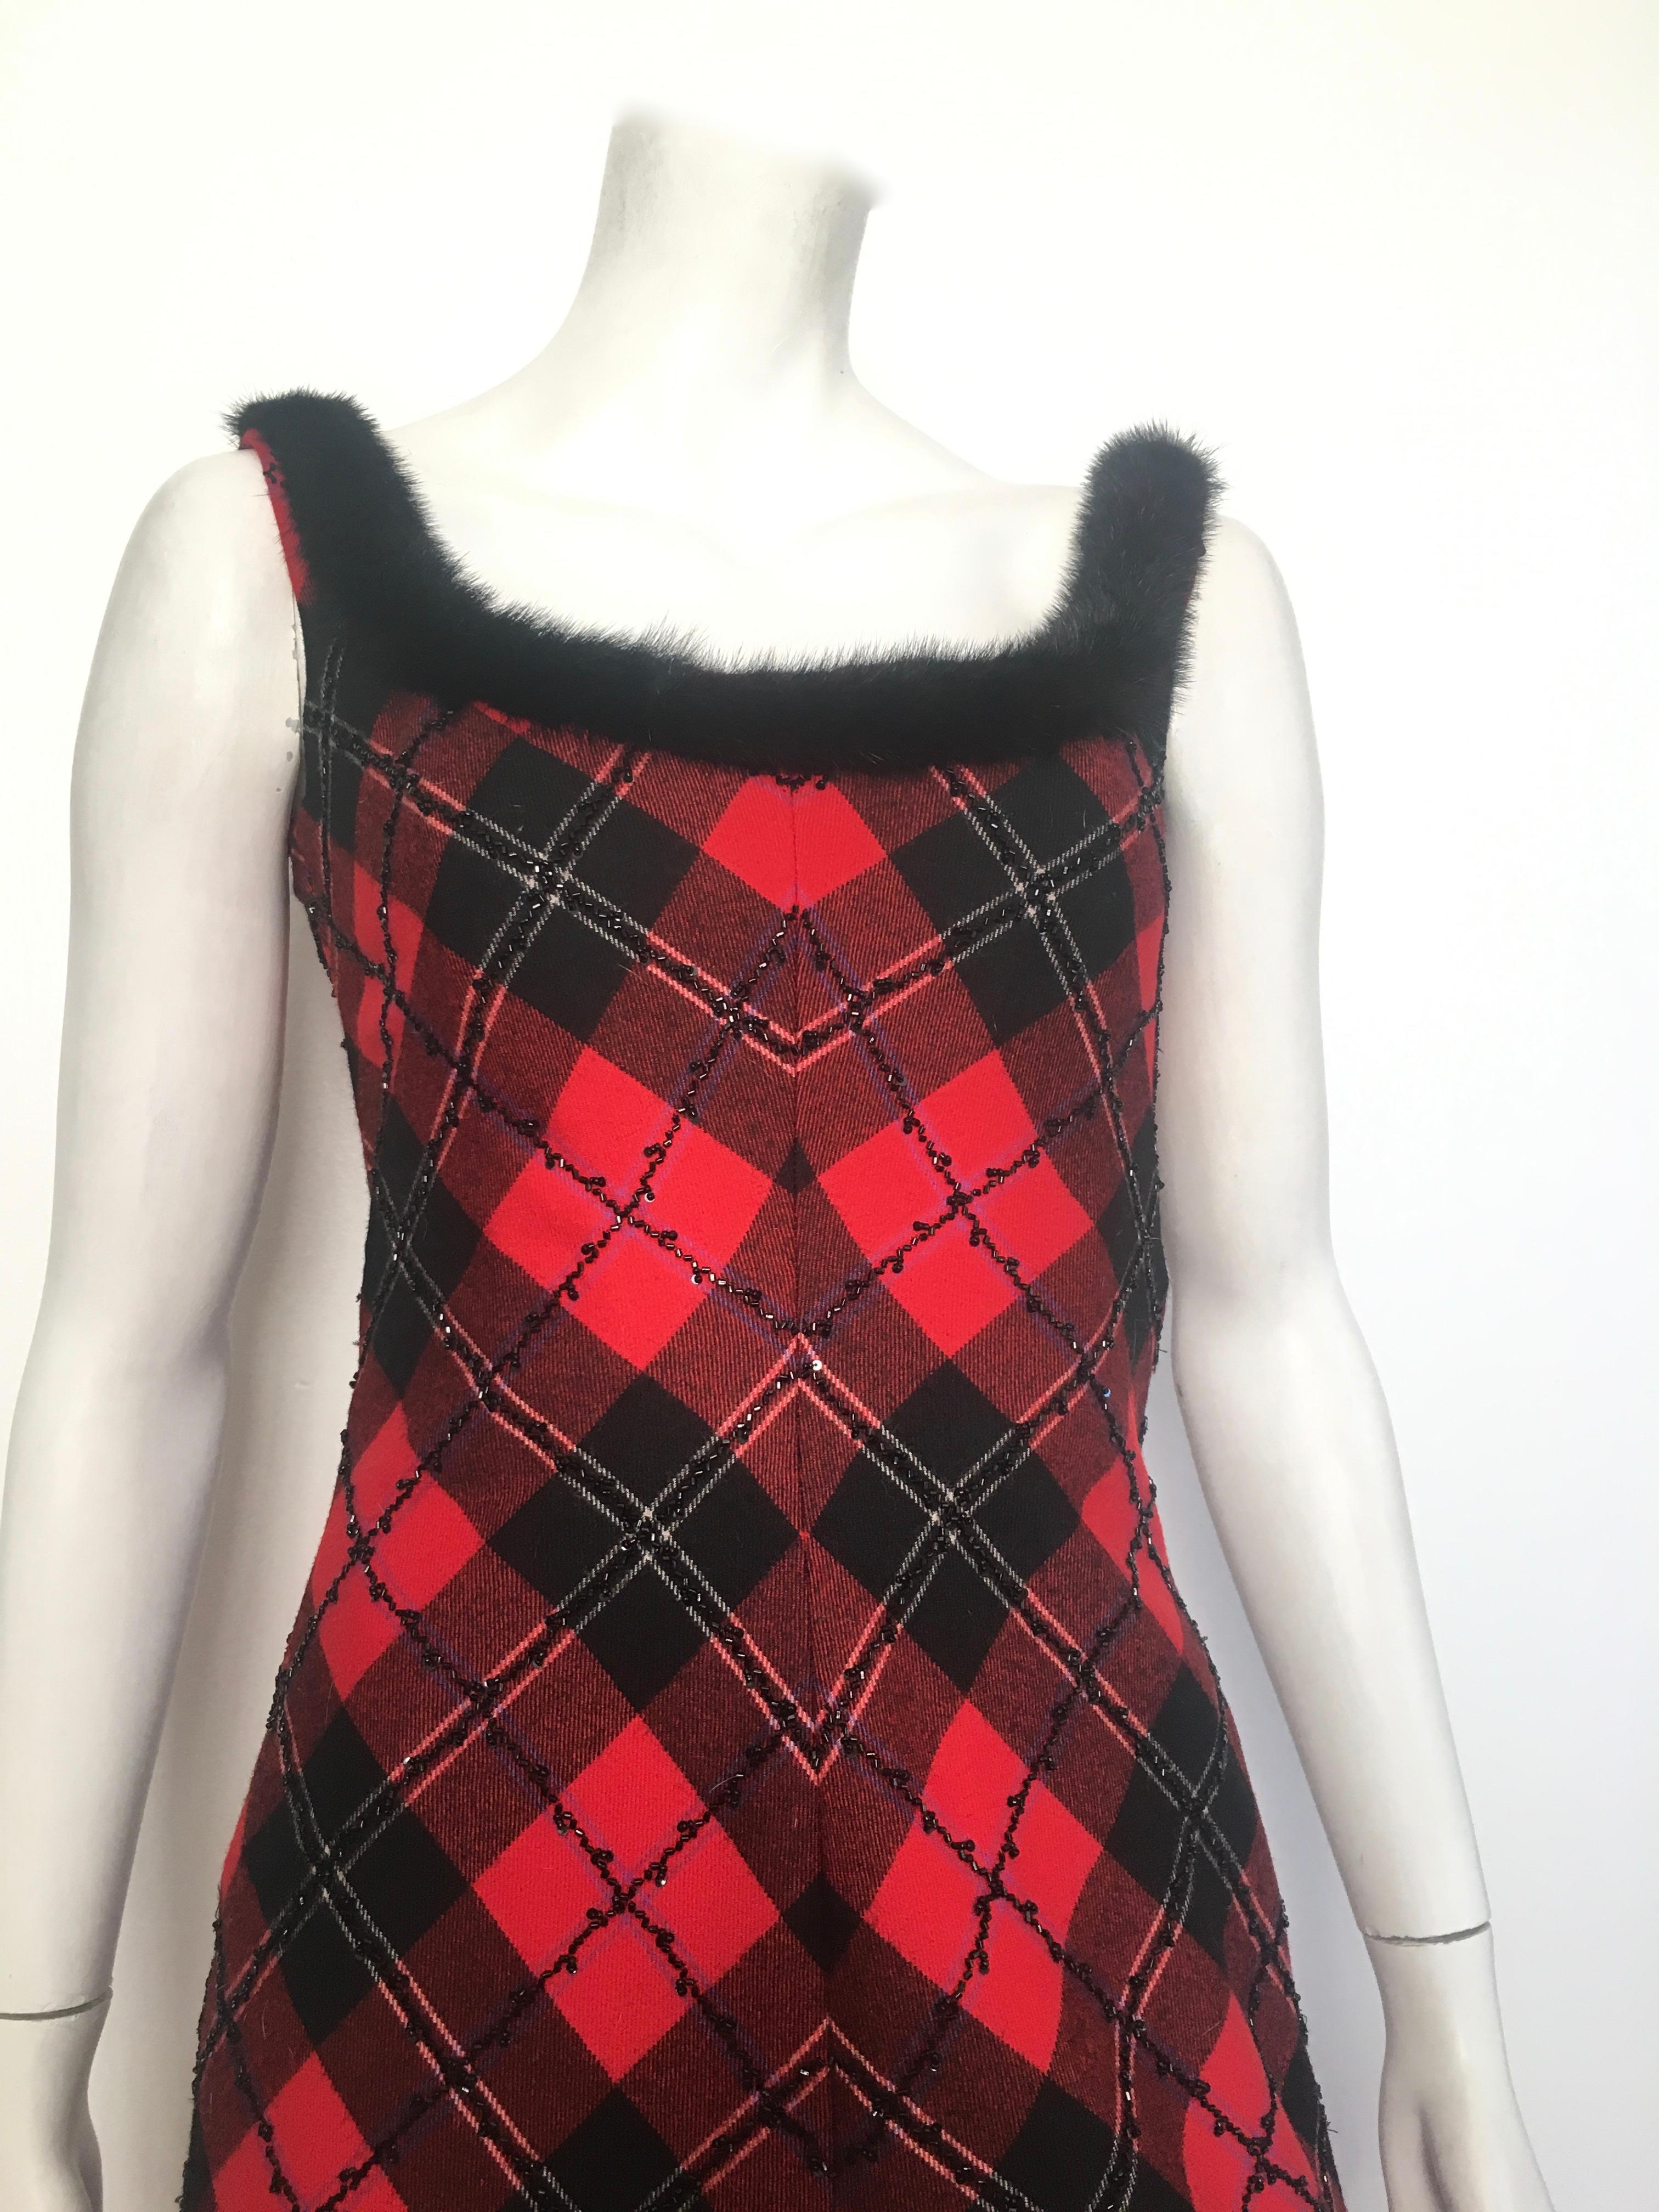 Bellville Sassoon Lorcan Mullany sleeveless plaid wool beaded with mink trim neckline is labeled a size 10 but fits like a size 4.  Matilda the Mannequin is a size 4 and this dress fits perfectly so ladies please grab your tape measure so you can